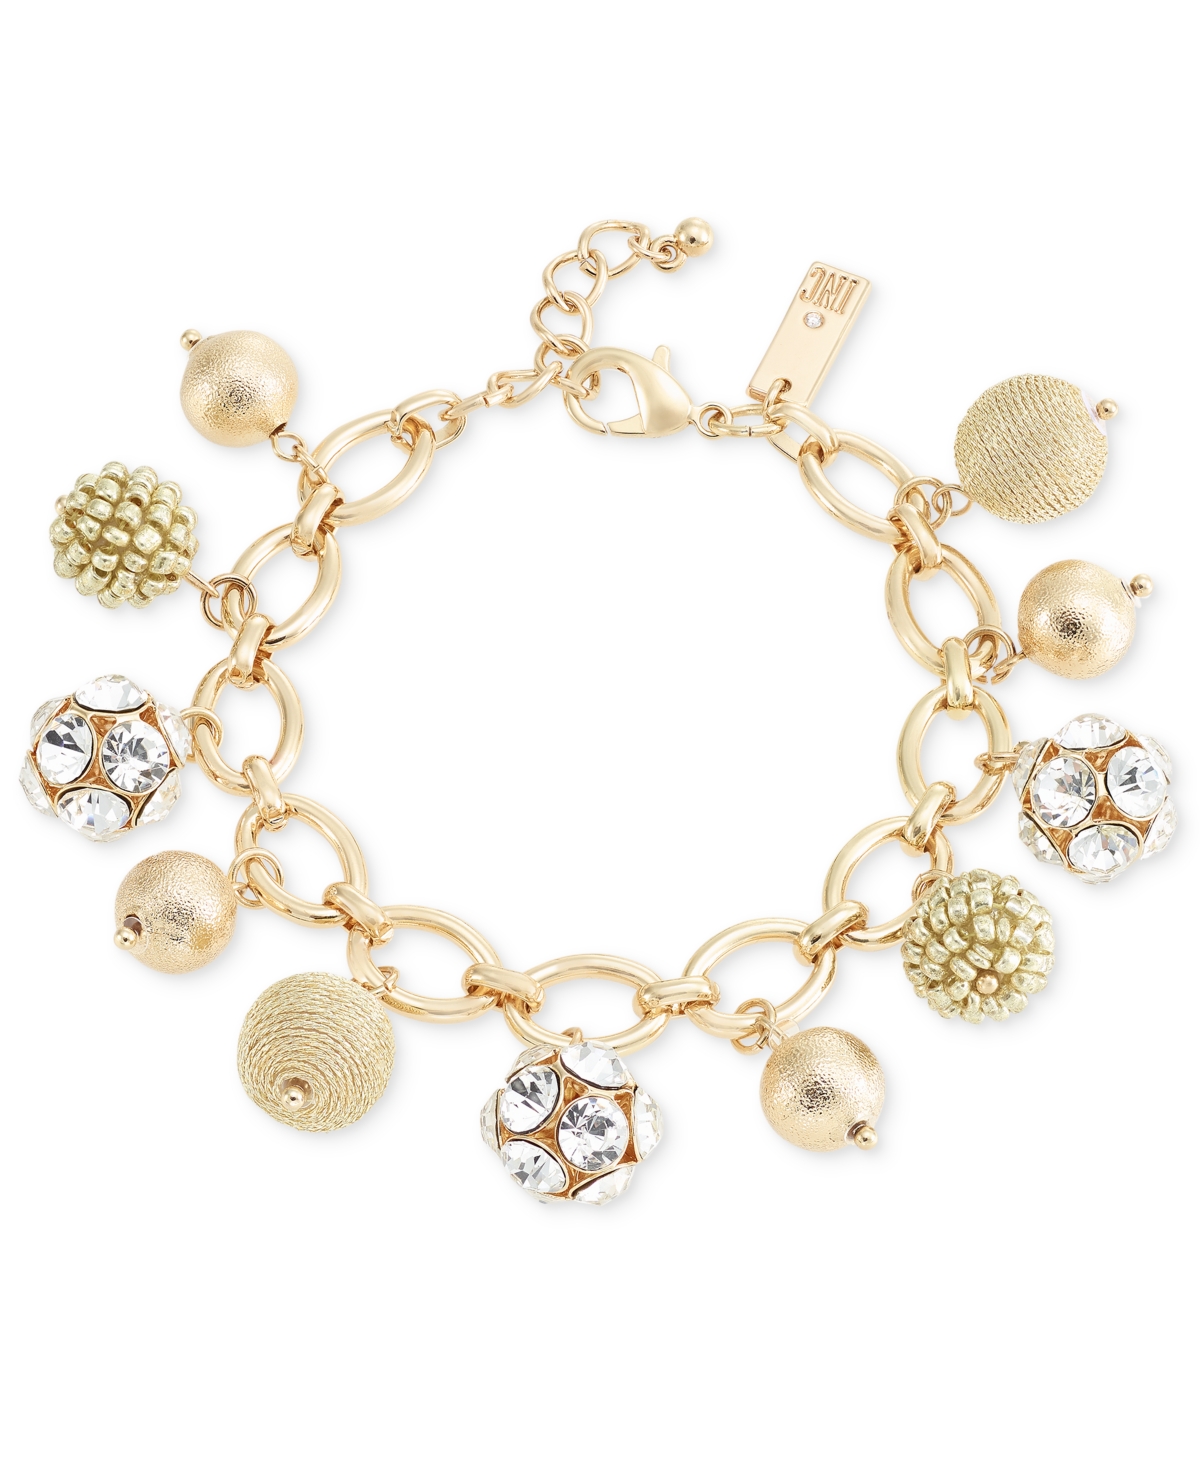 Gold-Tone Crystal & Thread-Wrapped Bead Charm Bracelet, Created for Macy's - Gold